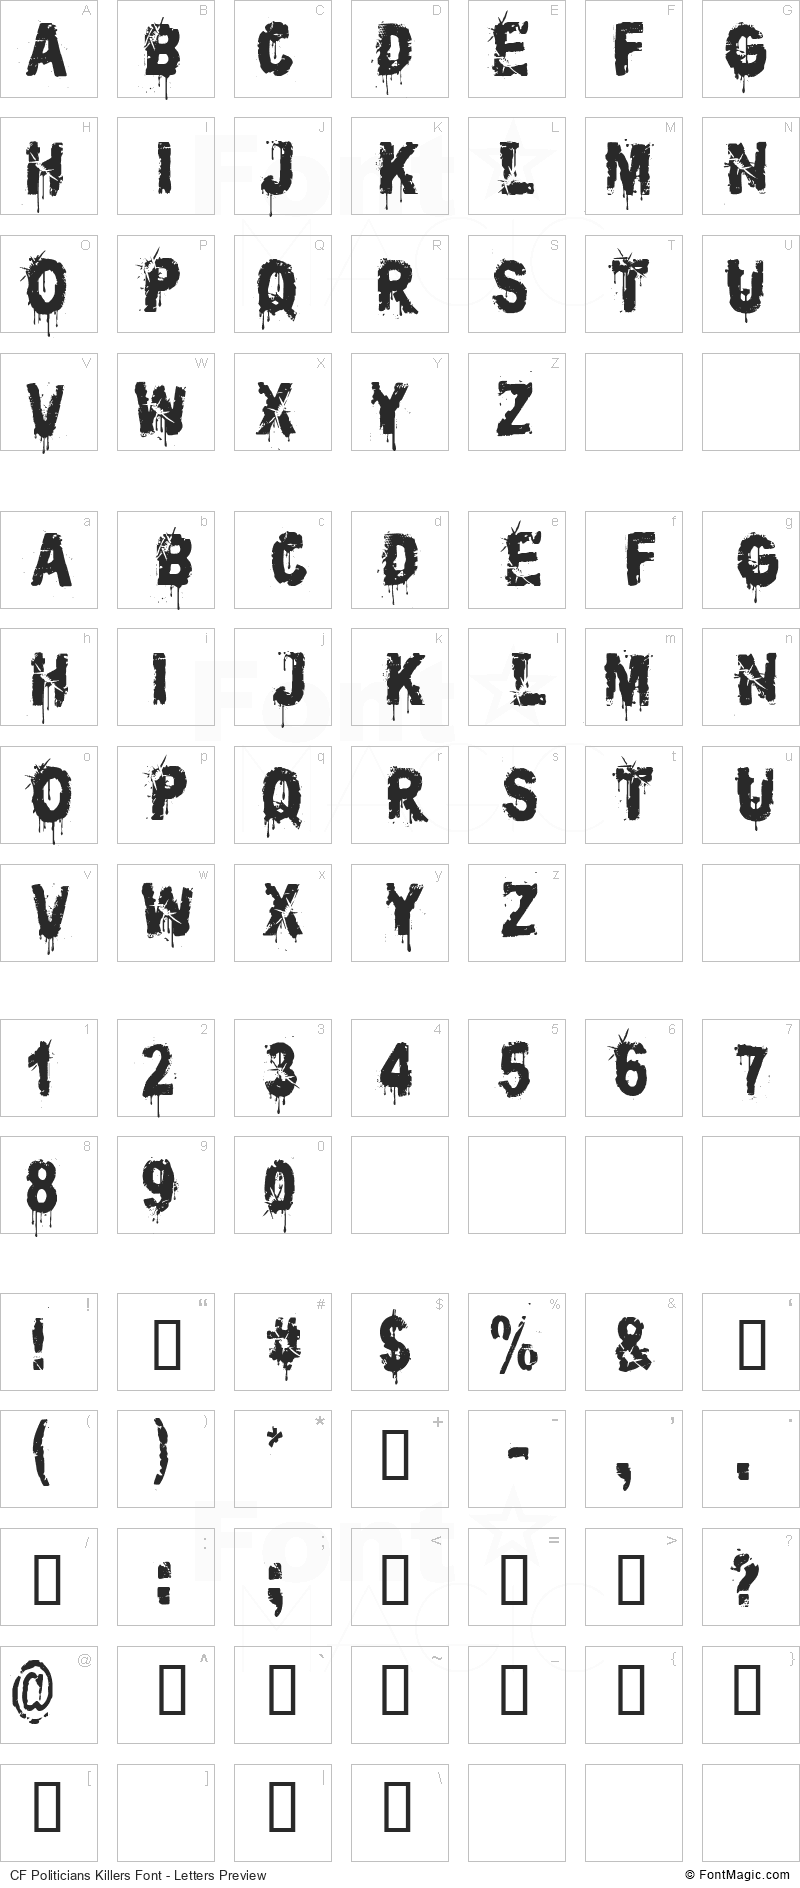 CF Politicians Killers Font - All Latters Preview Chart